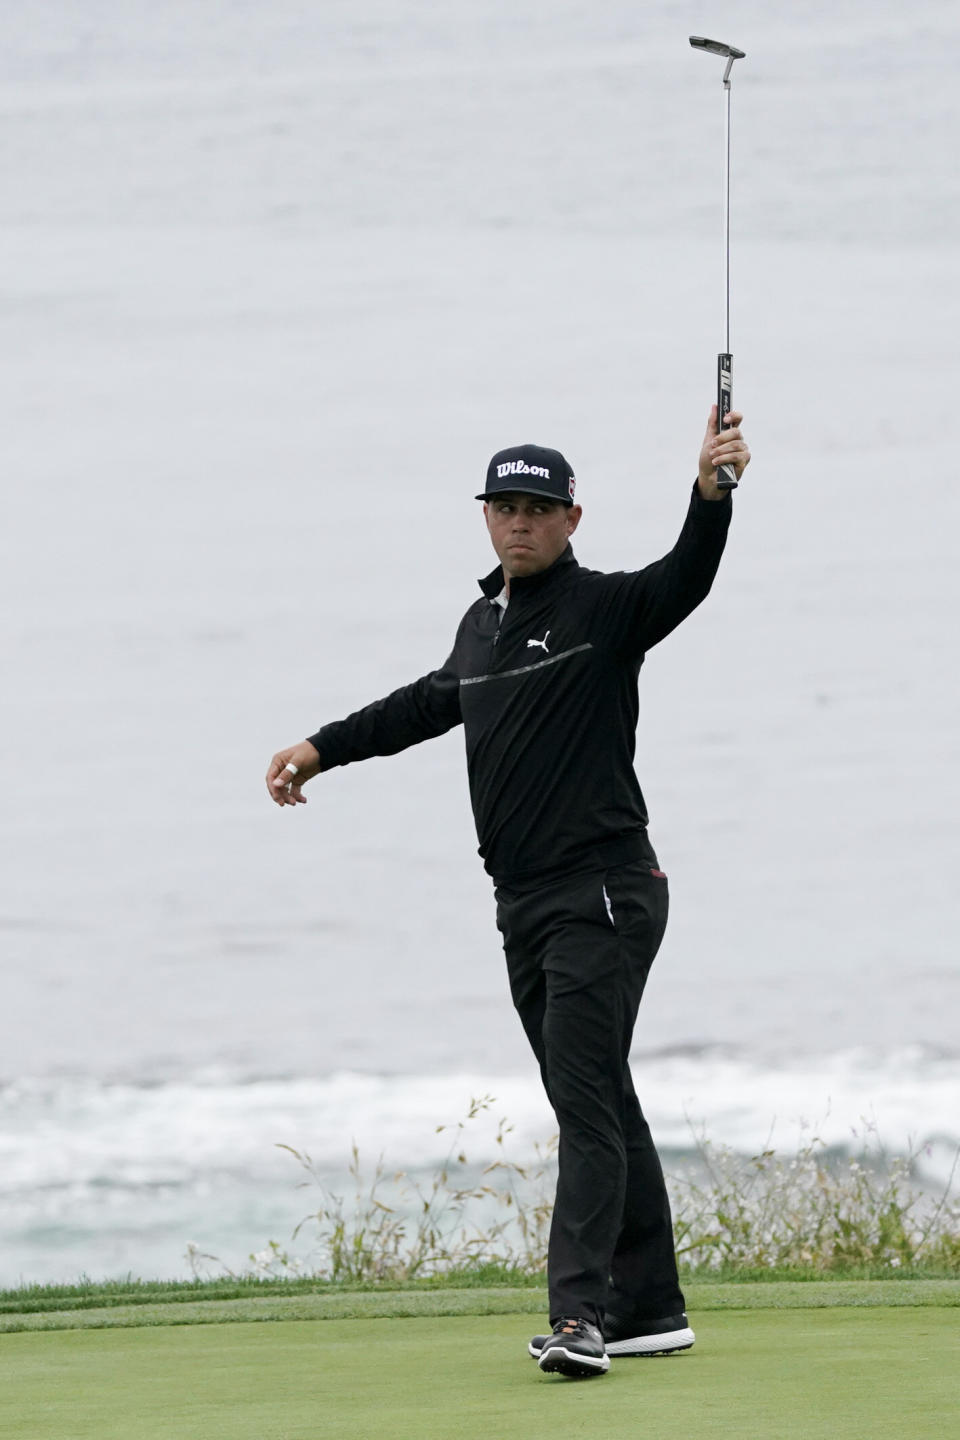 Gary Woodland reacts after making a birdie on the ninth hole during the second round of the U.S. Open golf tournament, Friday, June 14, 2019, in Pebble Beach, Calif. (AP Photo/Carolyn Kaster)